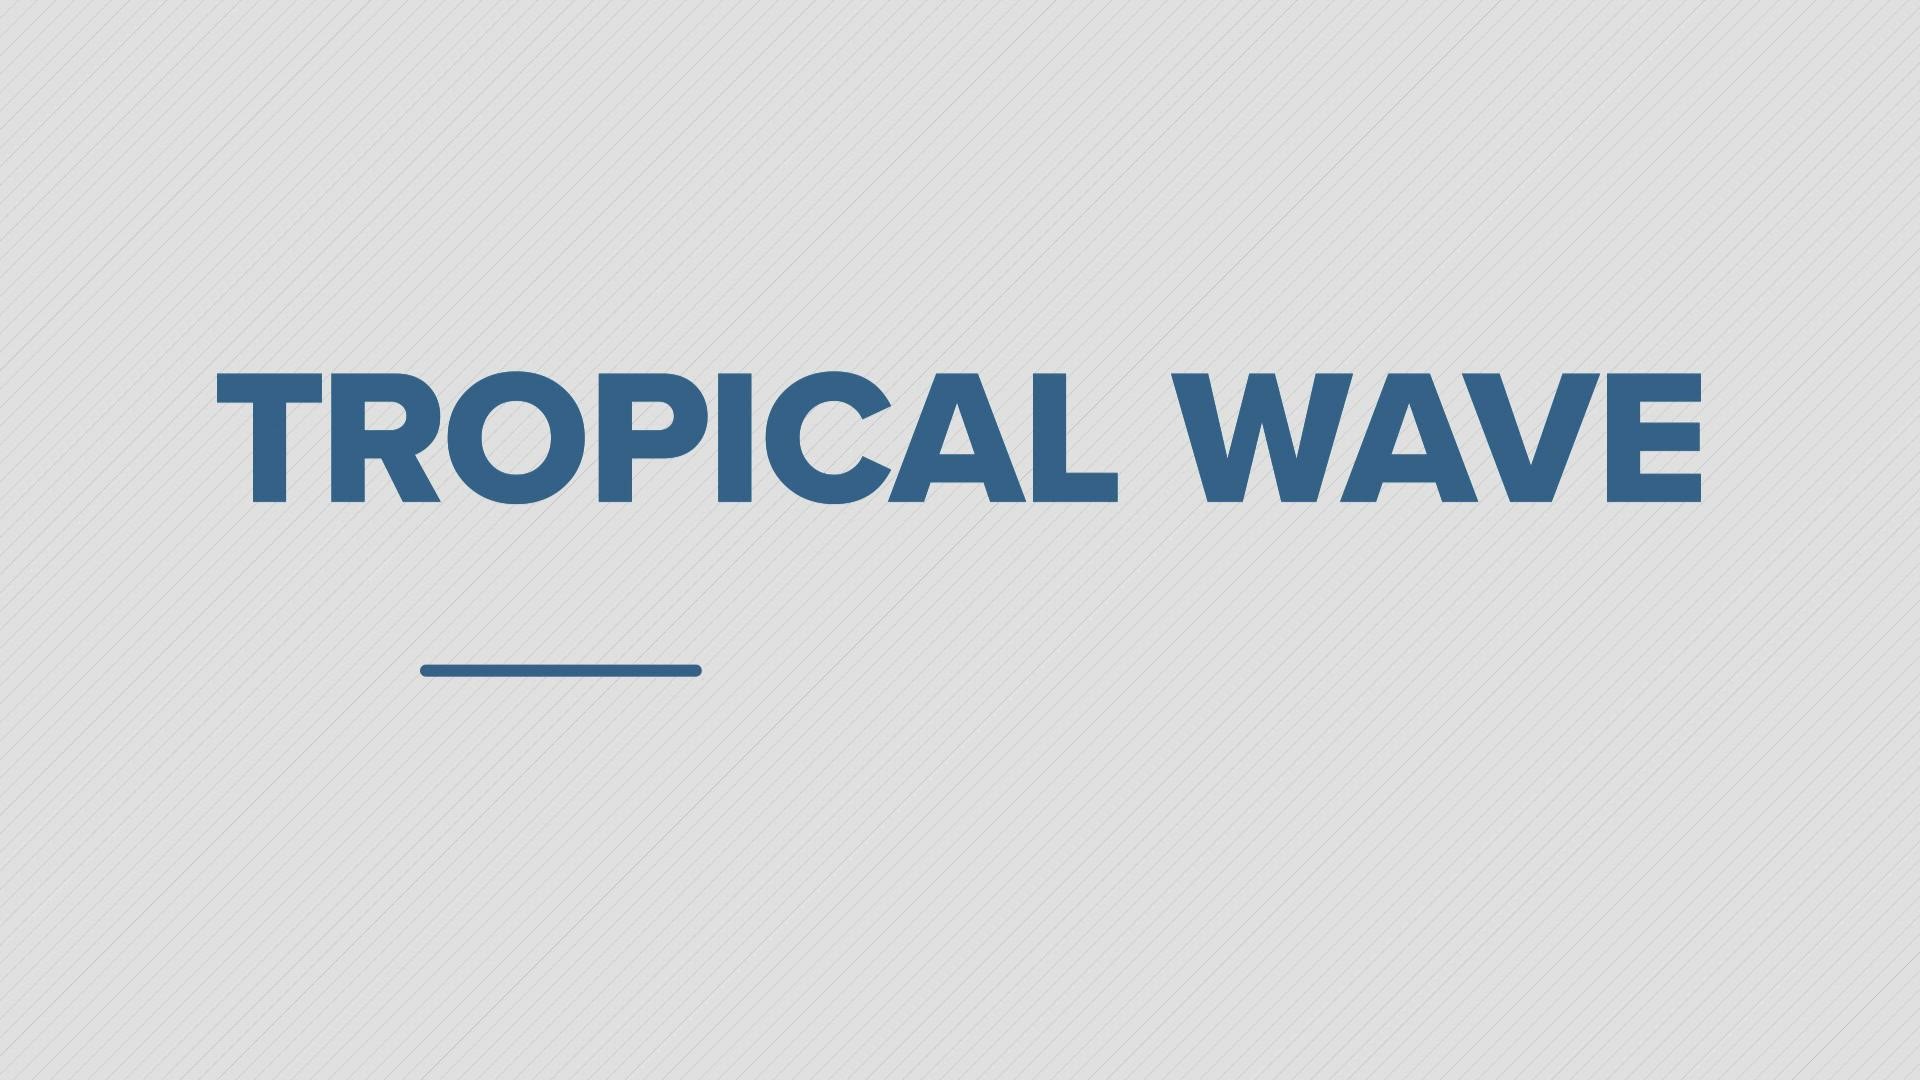 Tropical wave, invest, cyclone - do you know what these terms means?